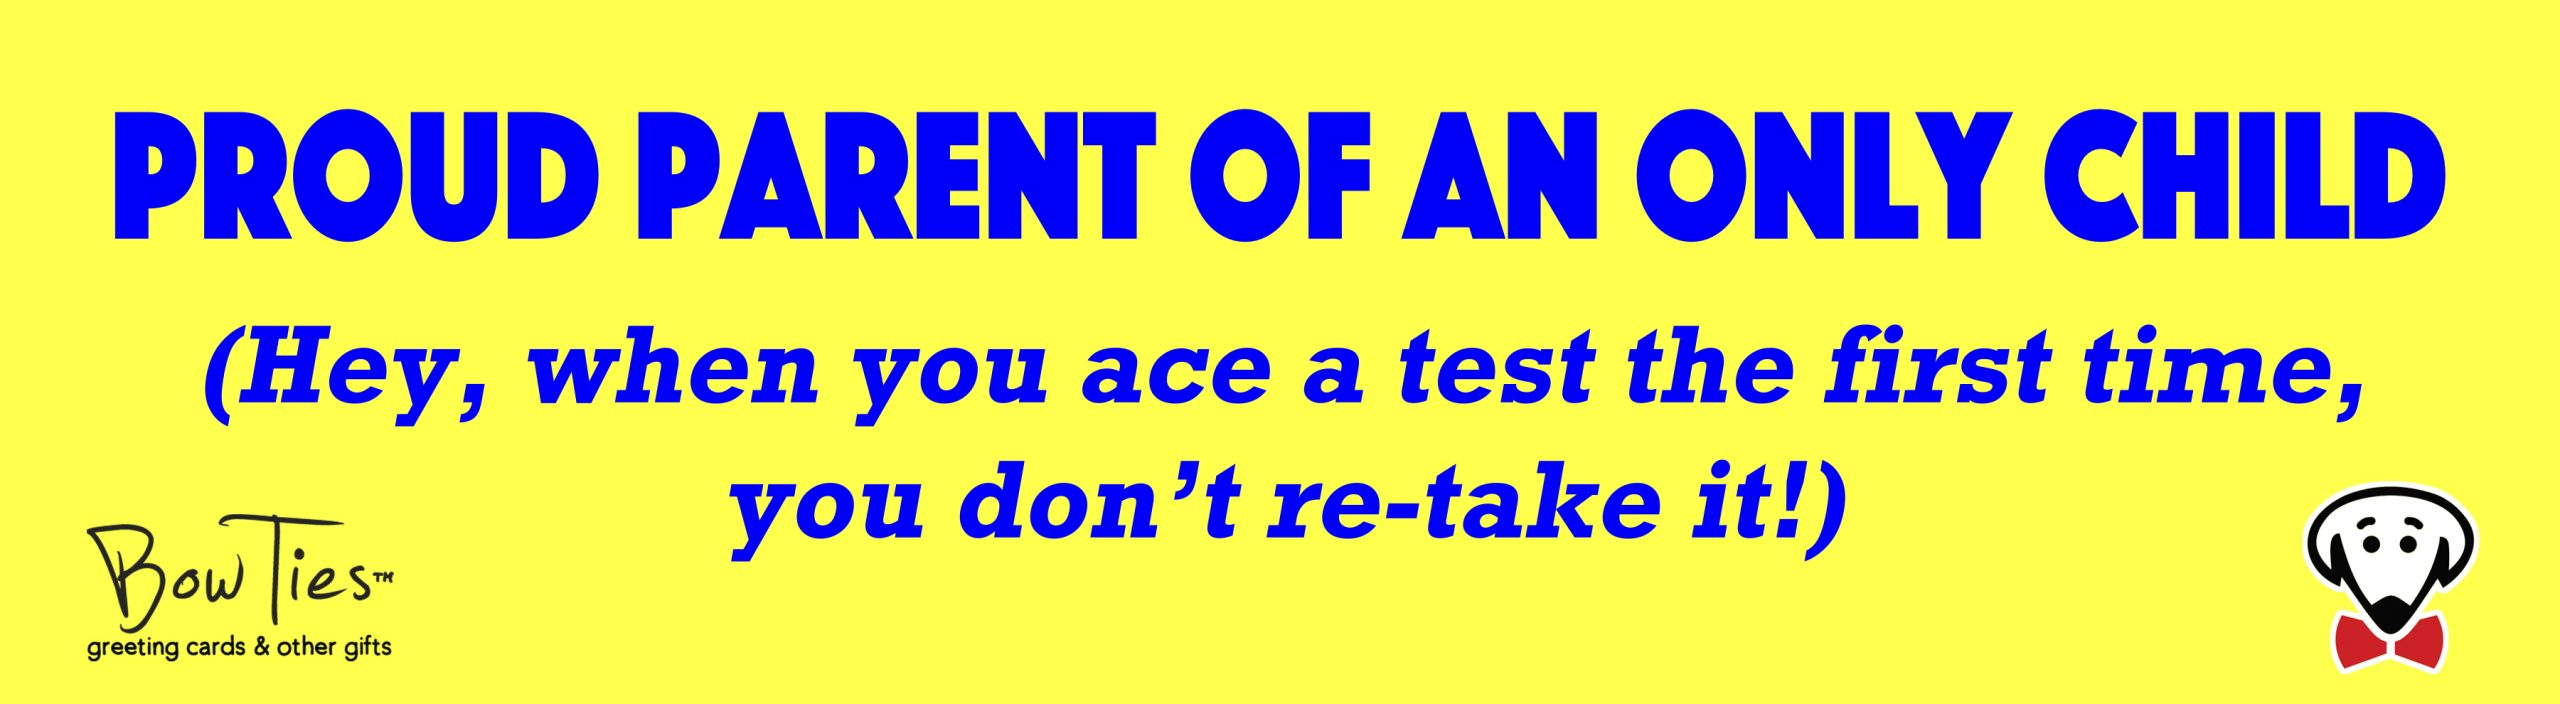 PROUD PARENT OF AN ONLY CHILD (Hey, when you ace a test the first time, you don’t re-take it) – sticker